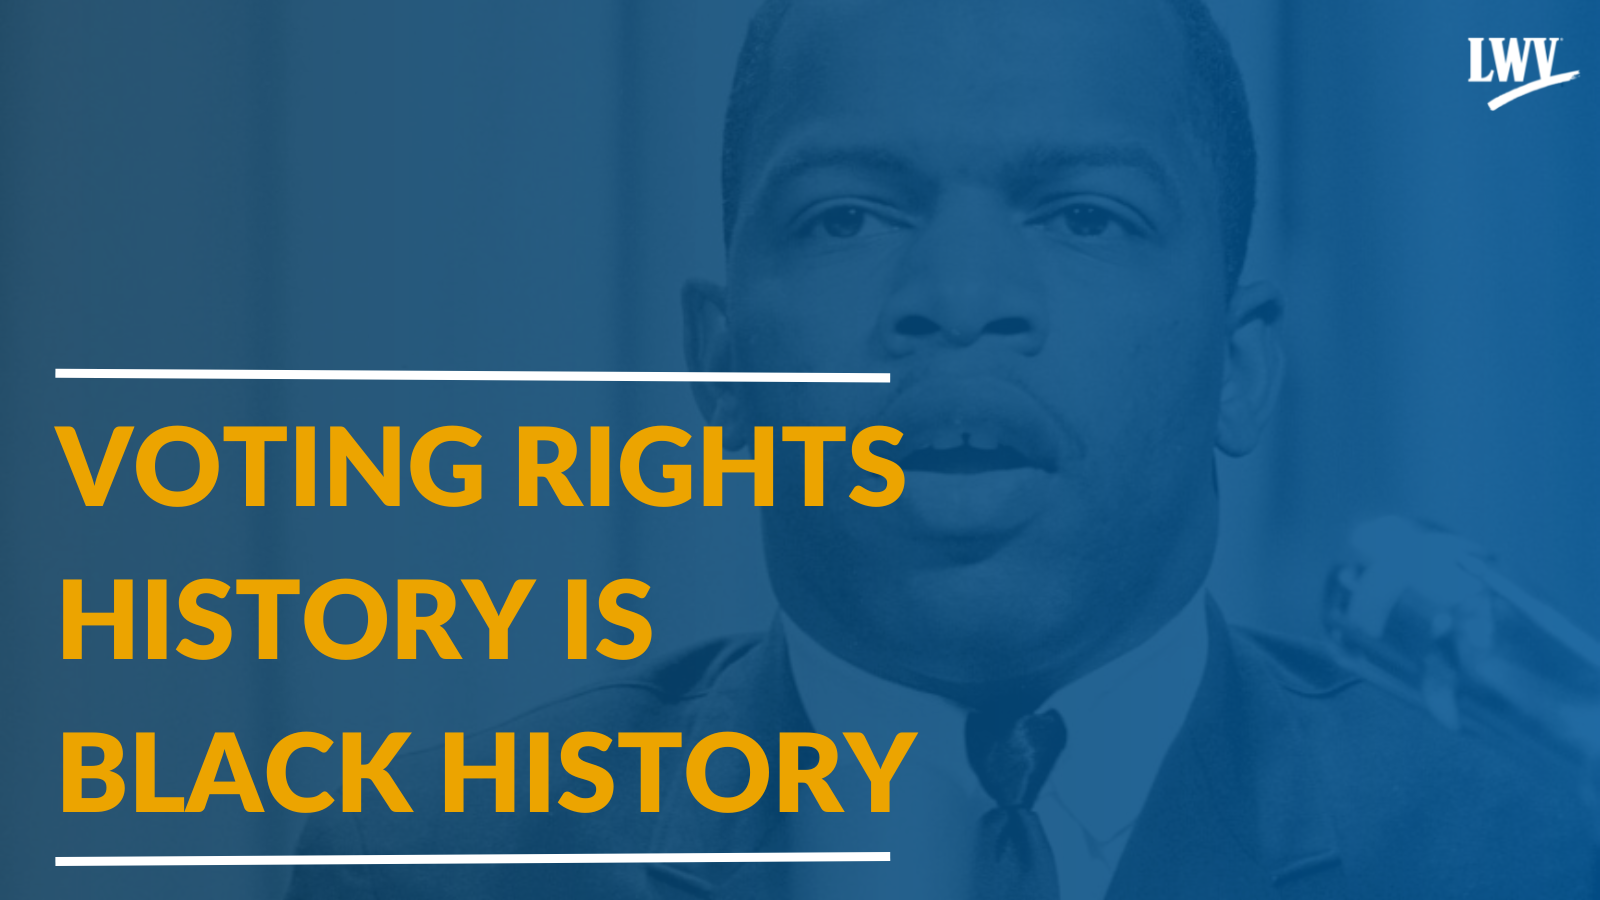 Voting rights history is Black history